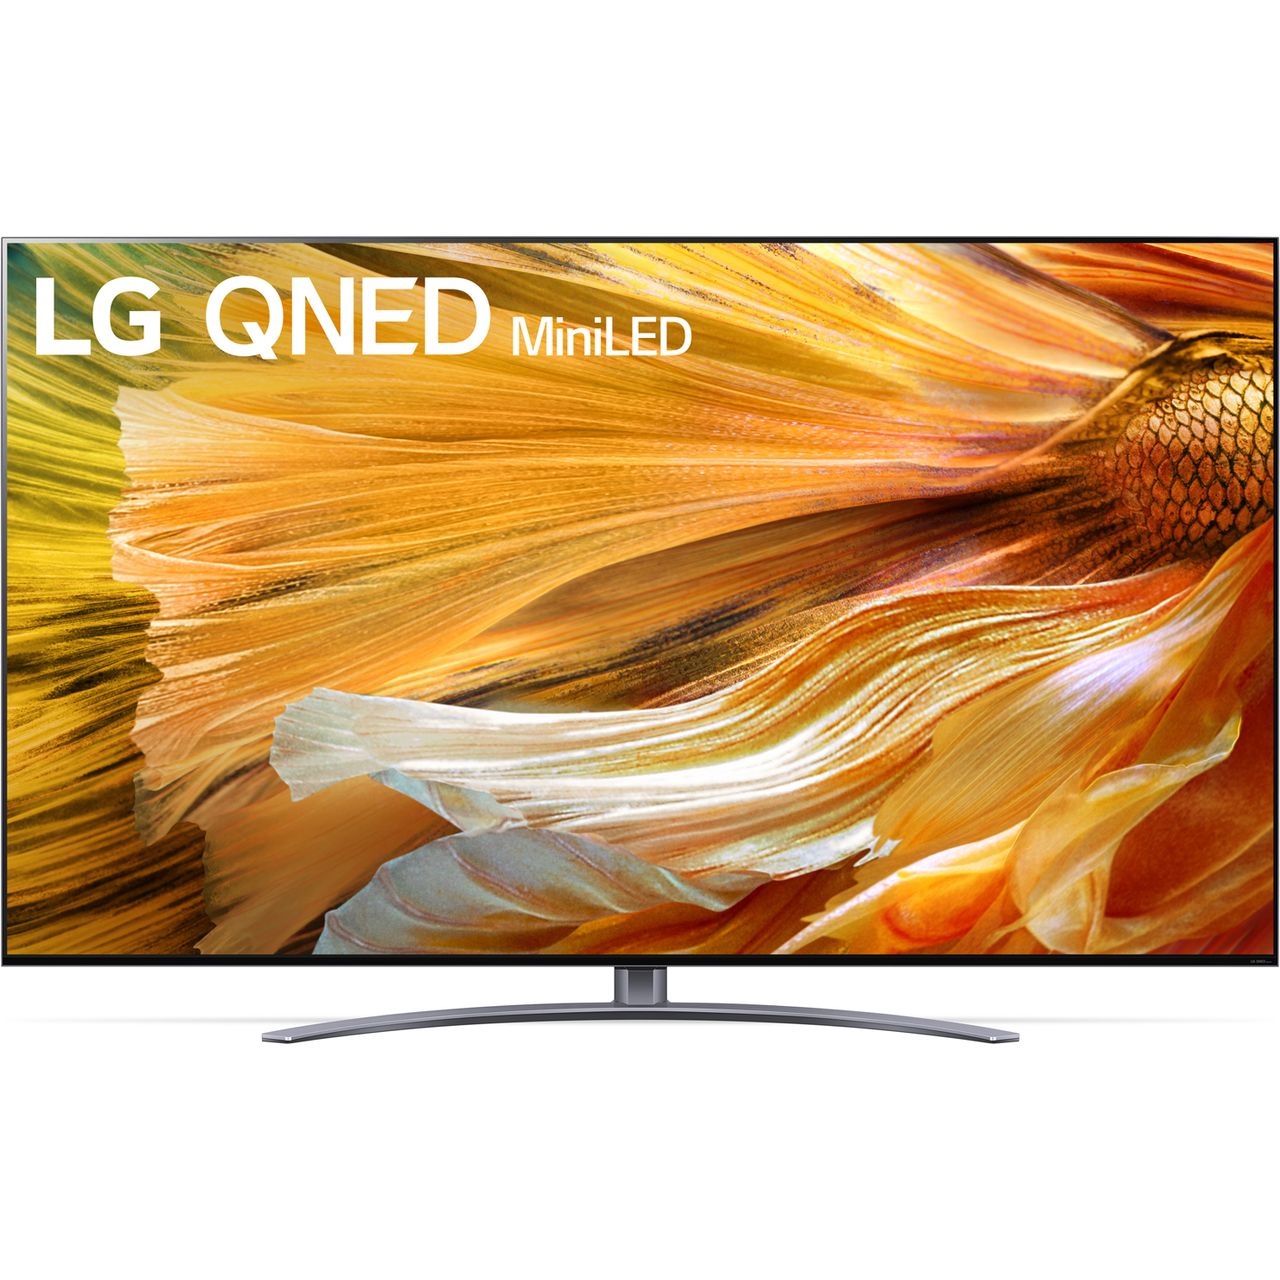 LG QNED91-Serie 75QNED919PA Fernseher - Schwarz